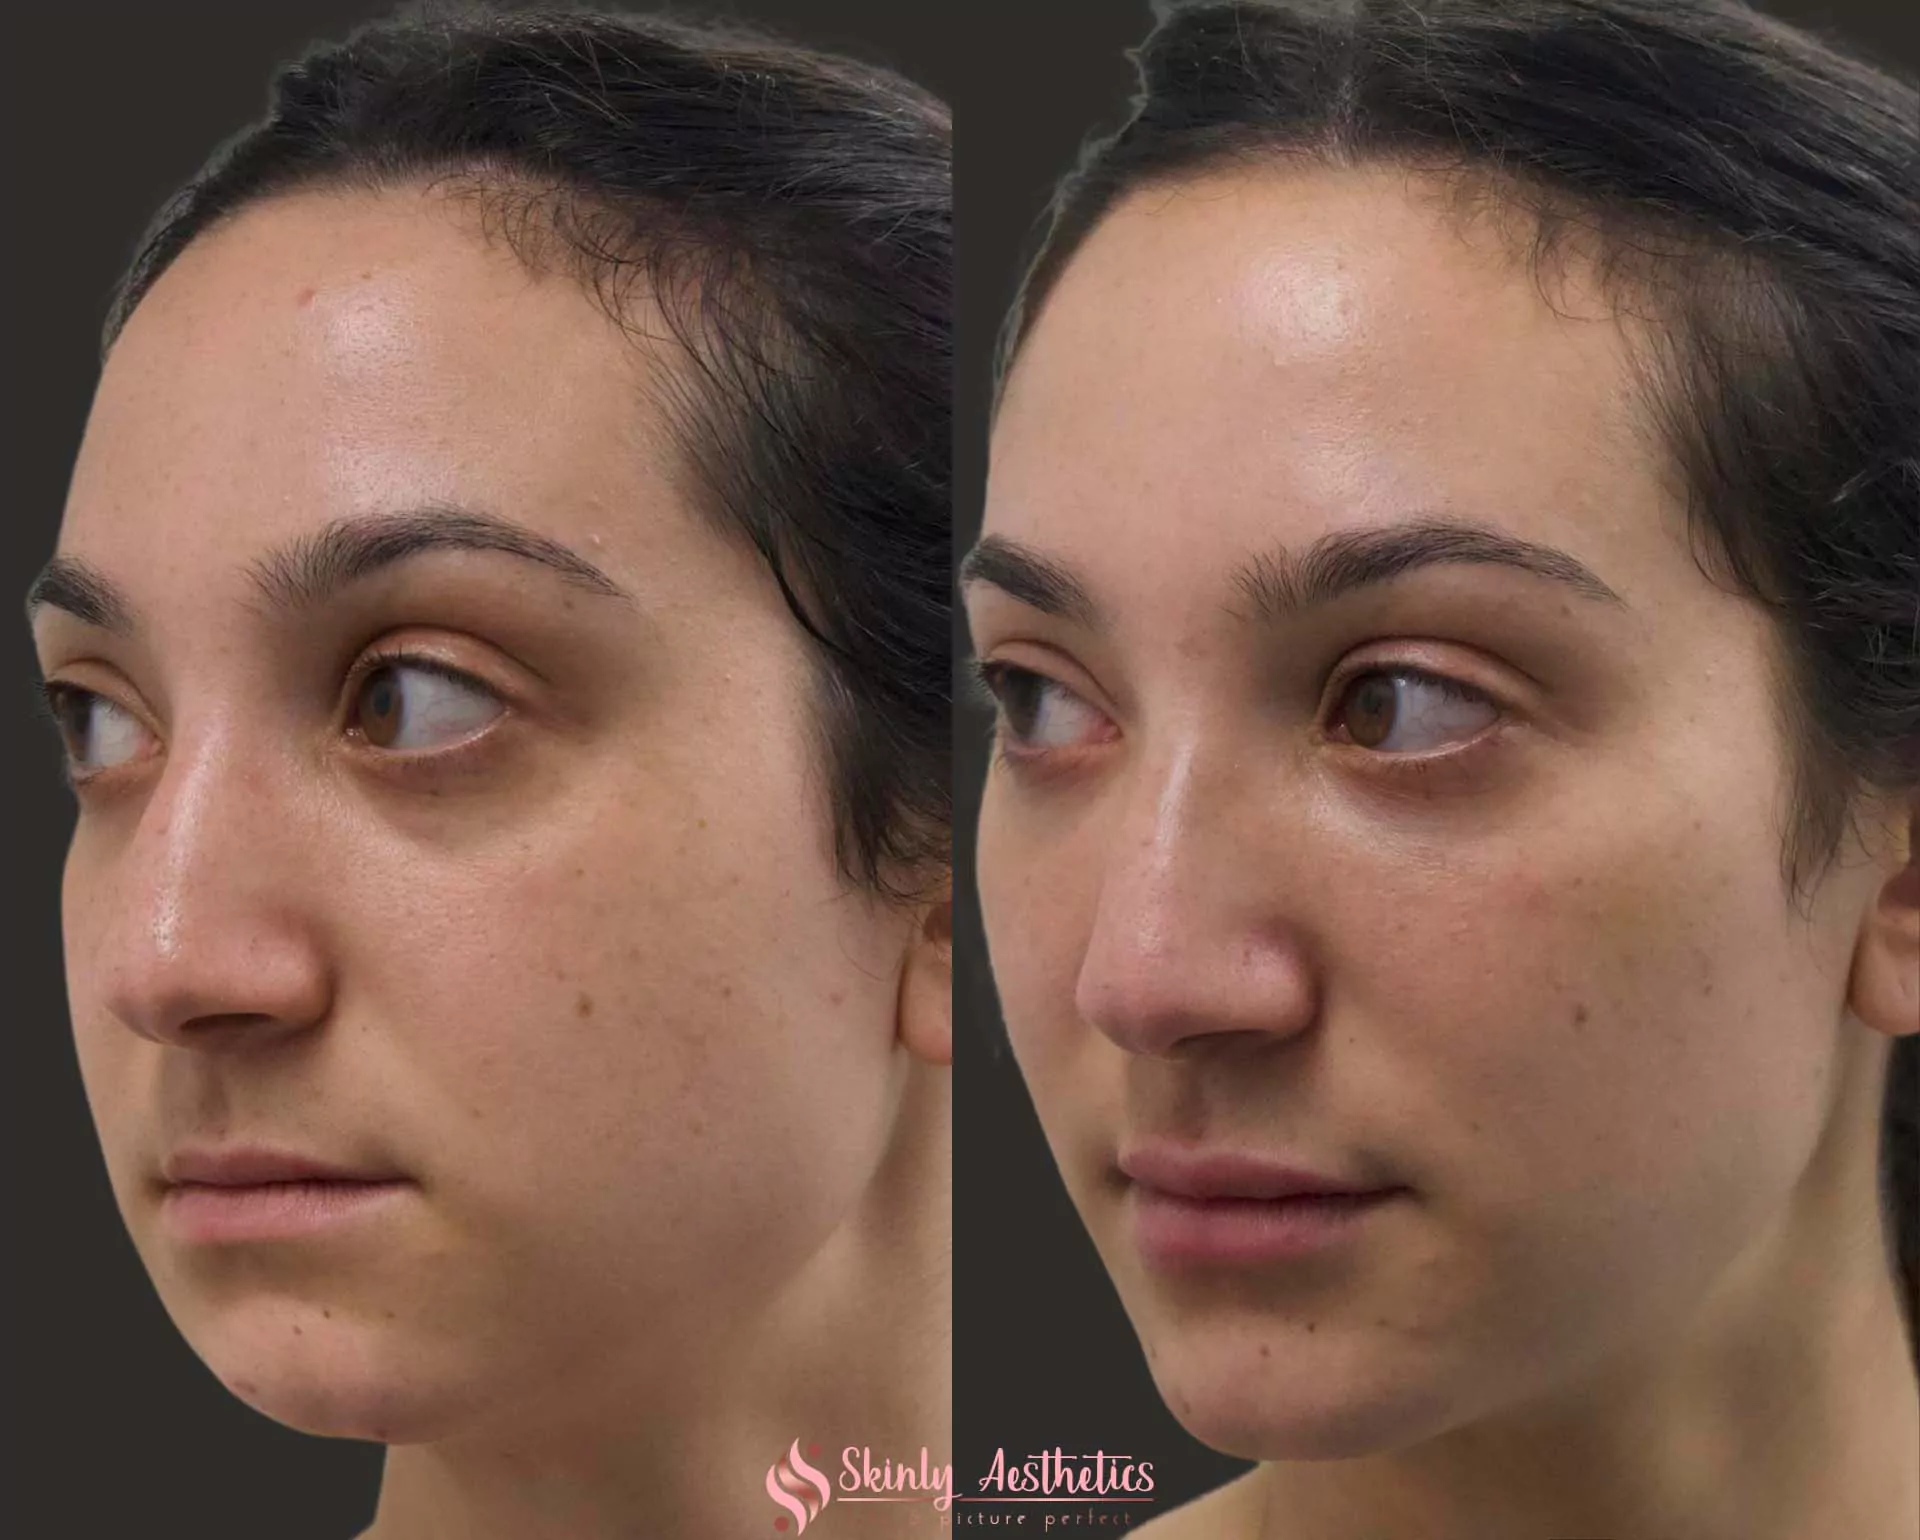 chin augmentation with Juvederm filler injection